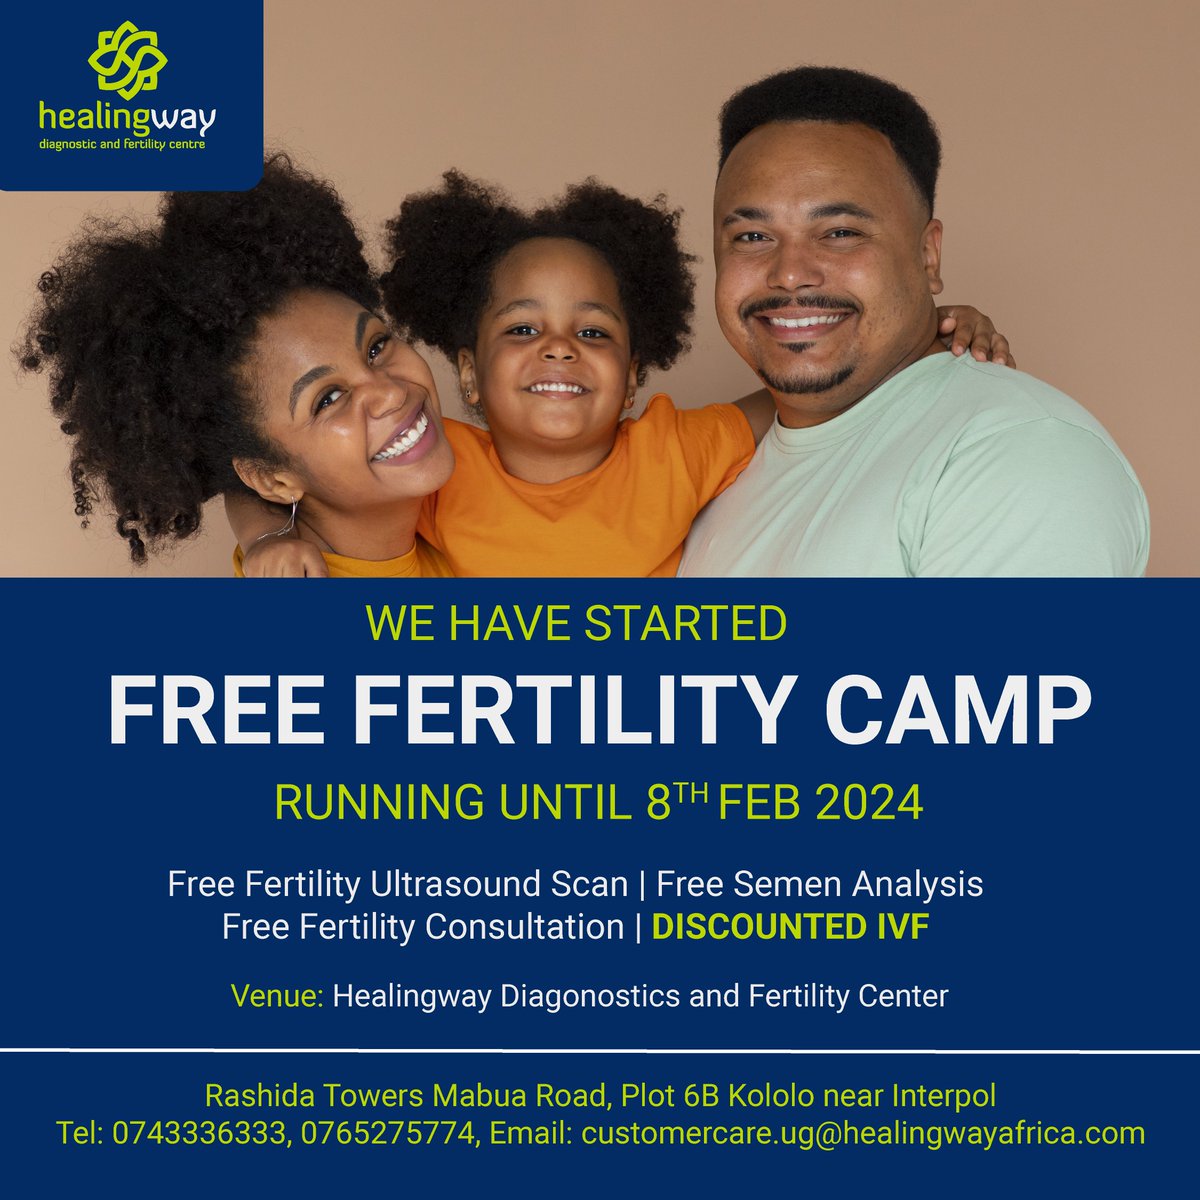 Exciting News! Our Fertility Camp kicks off today and runs until Feb 8th!  Join us on this empowering journey towards parenthood. Let's navigate the path to fertility together.  #FertilityCamp #ParenthoodJourney #EmpowerWithHope' #Healingway